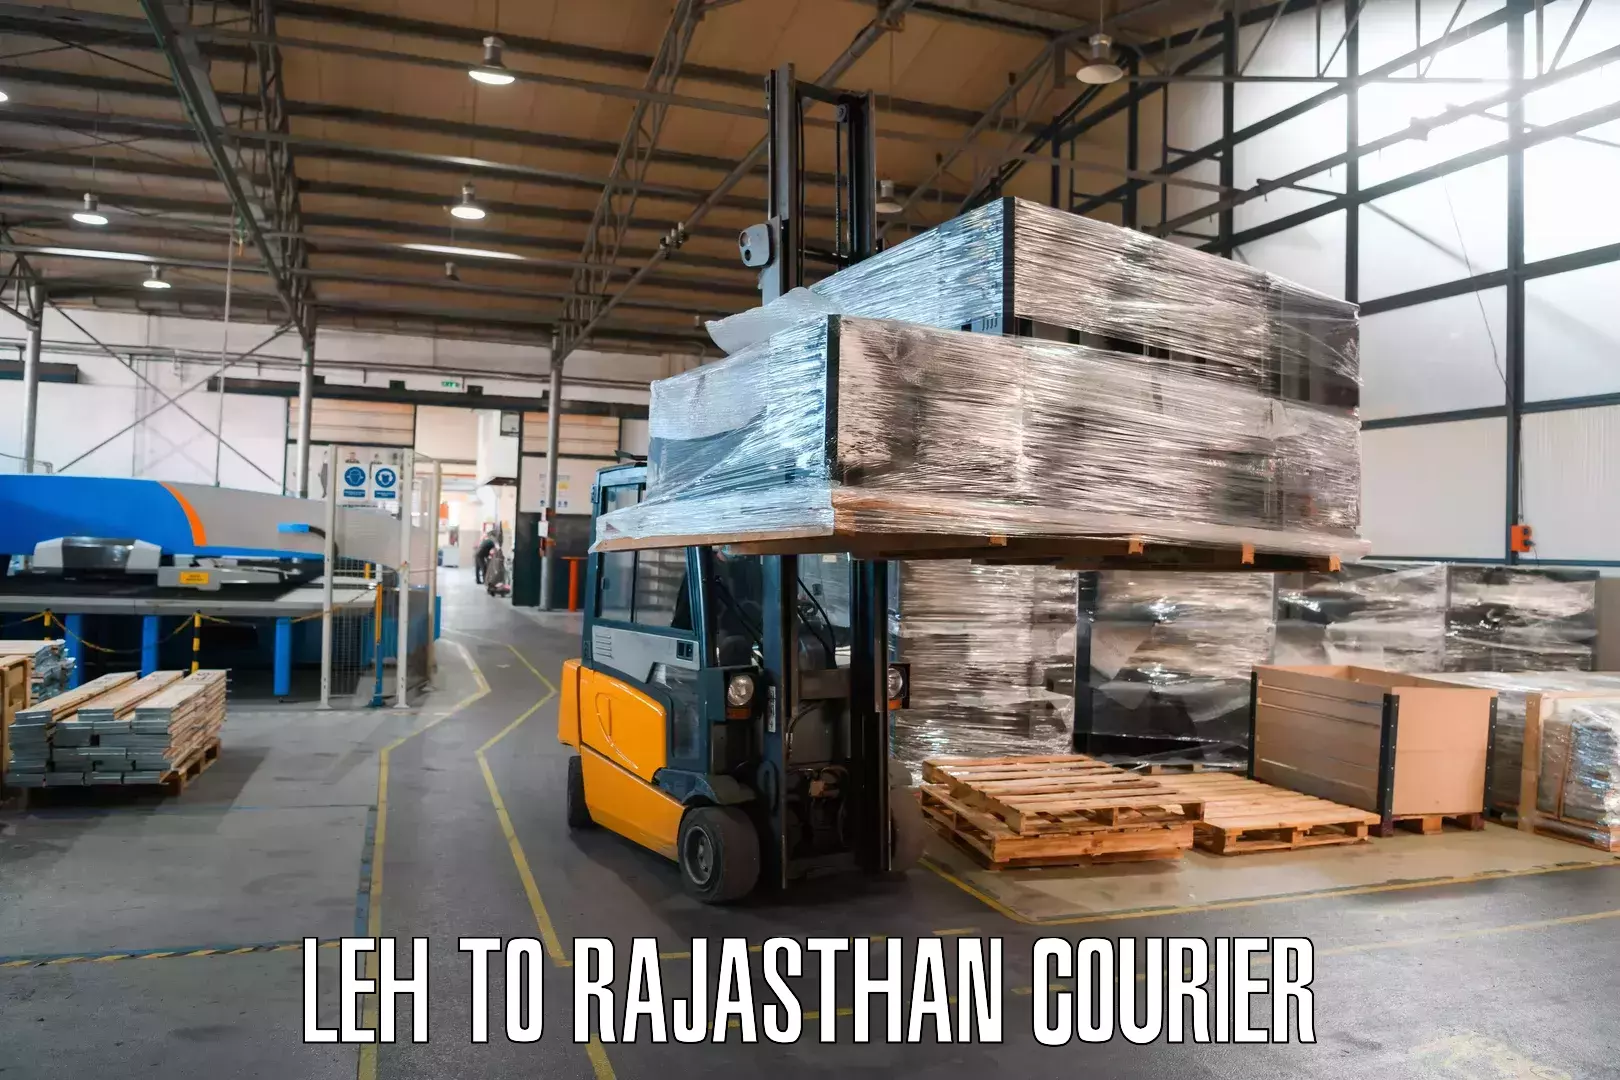 Quality courier partnerships Leh to Dungarpur